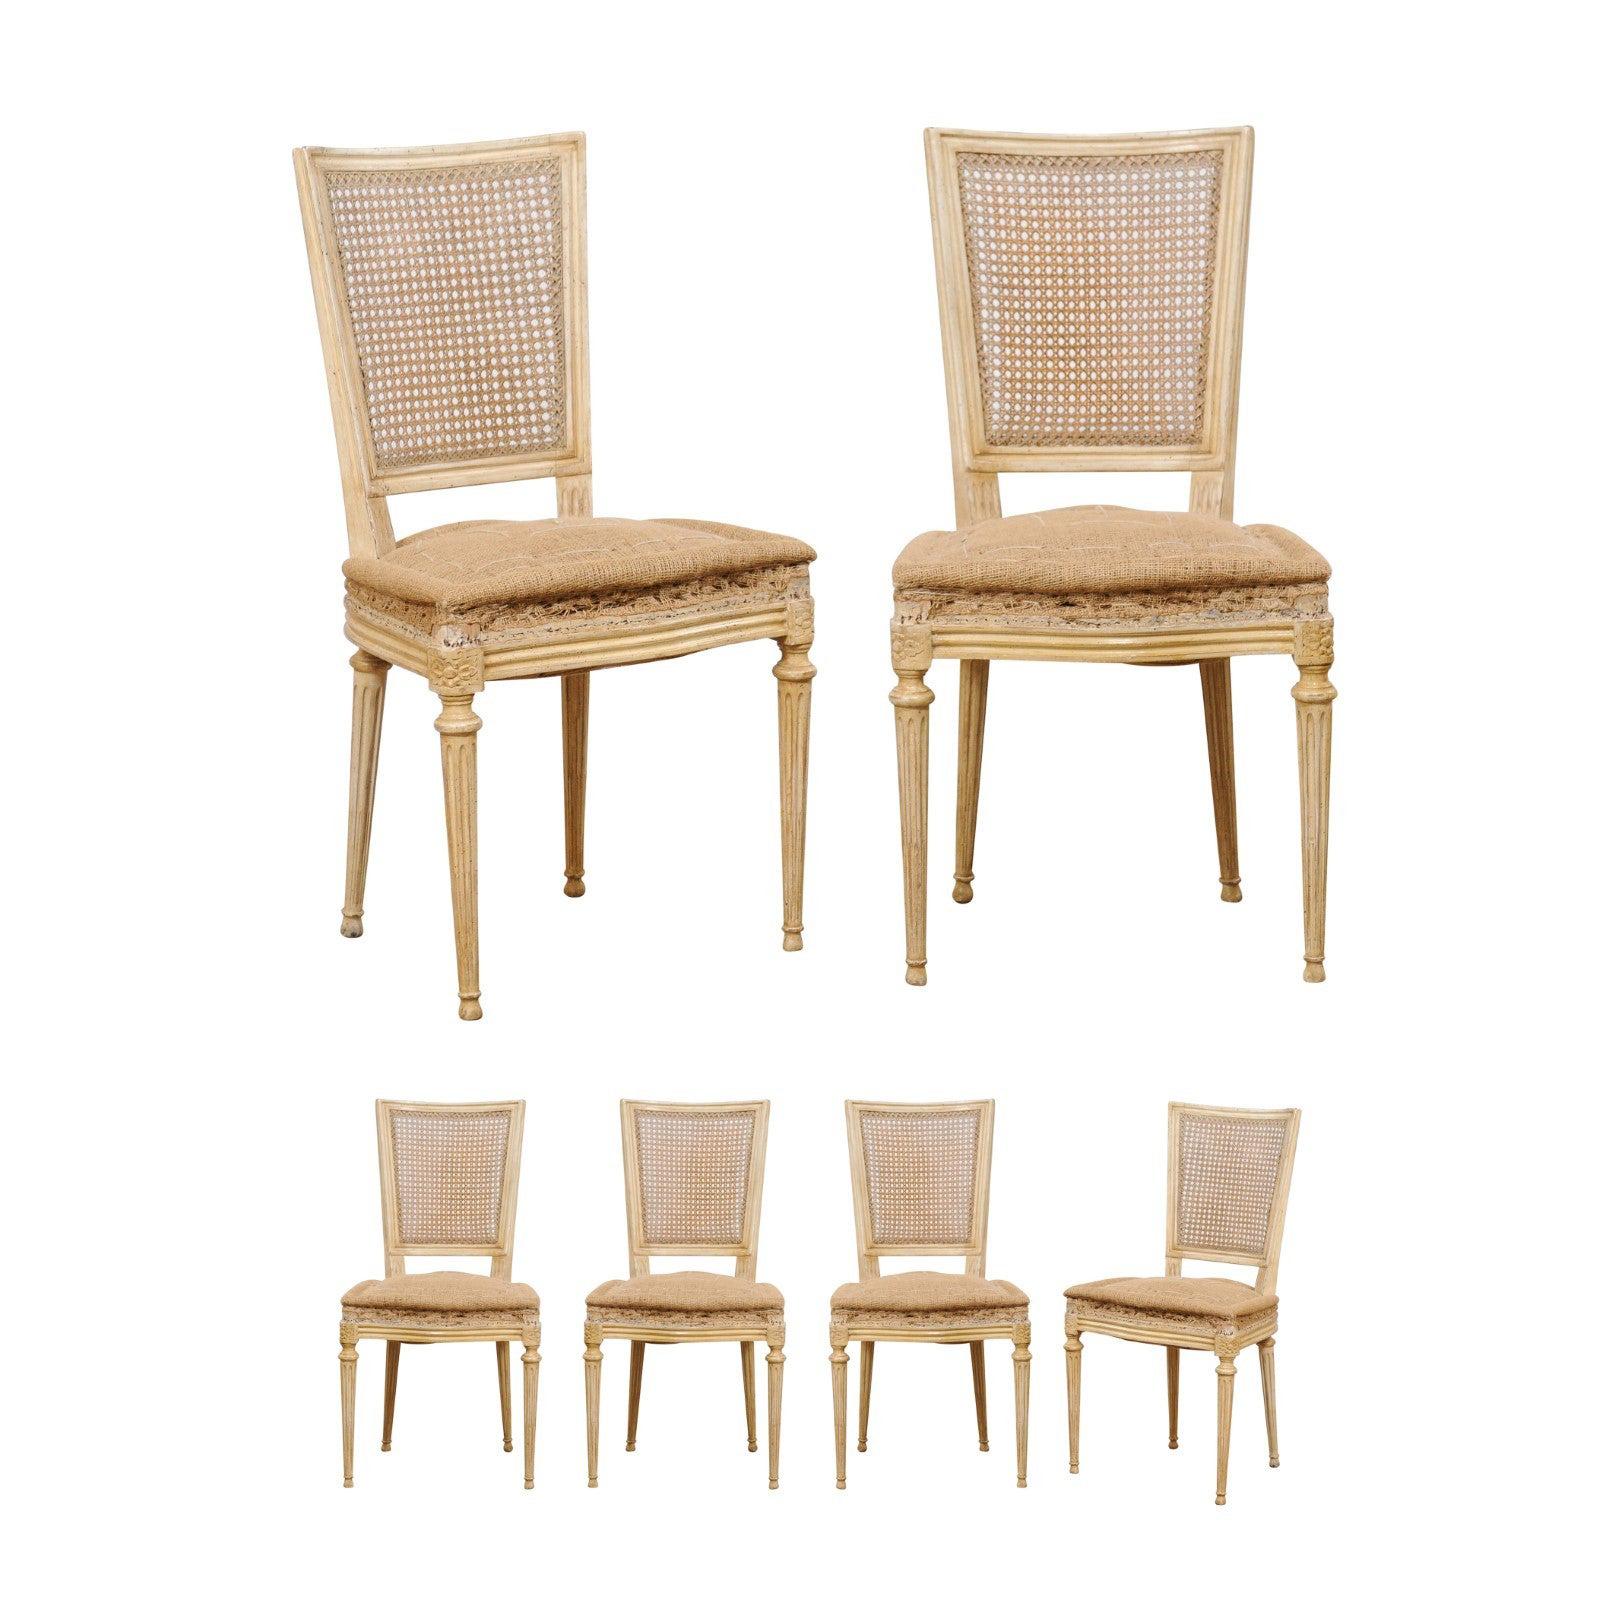 French Set of Six Louis XVI Style Cane Back Side Chairs, Early 20th C.